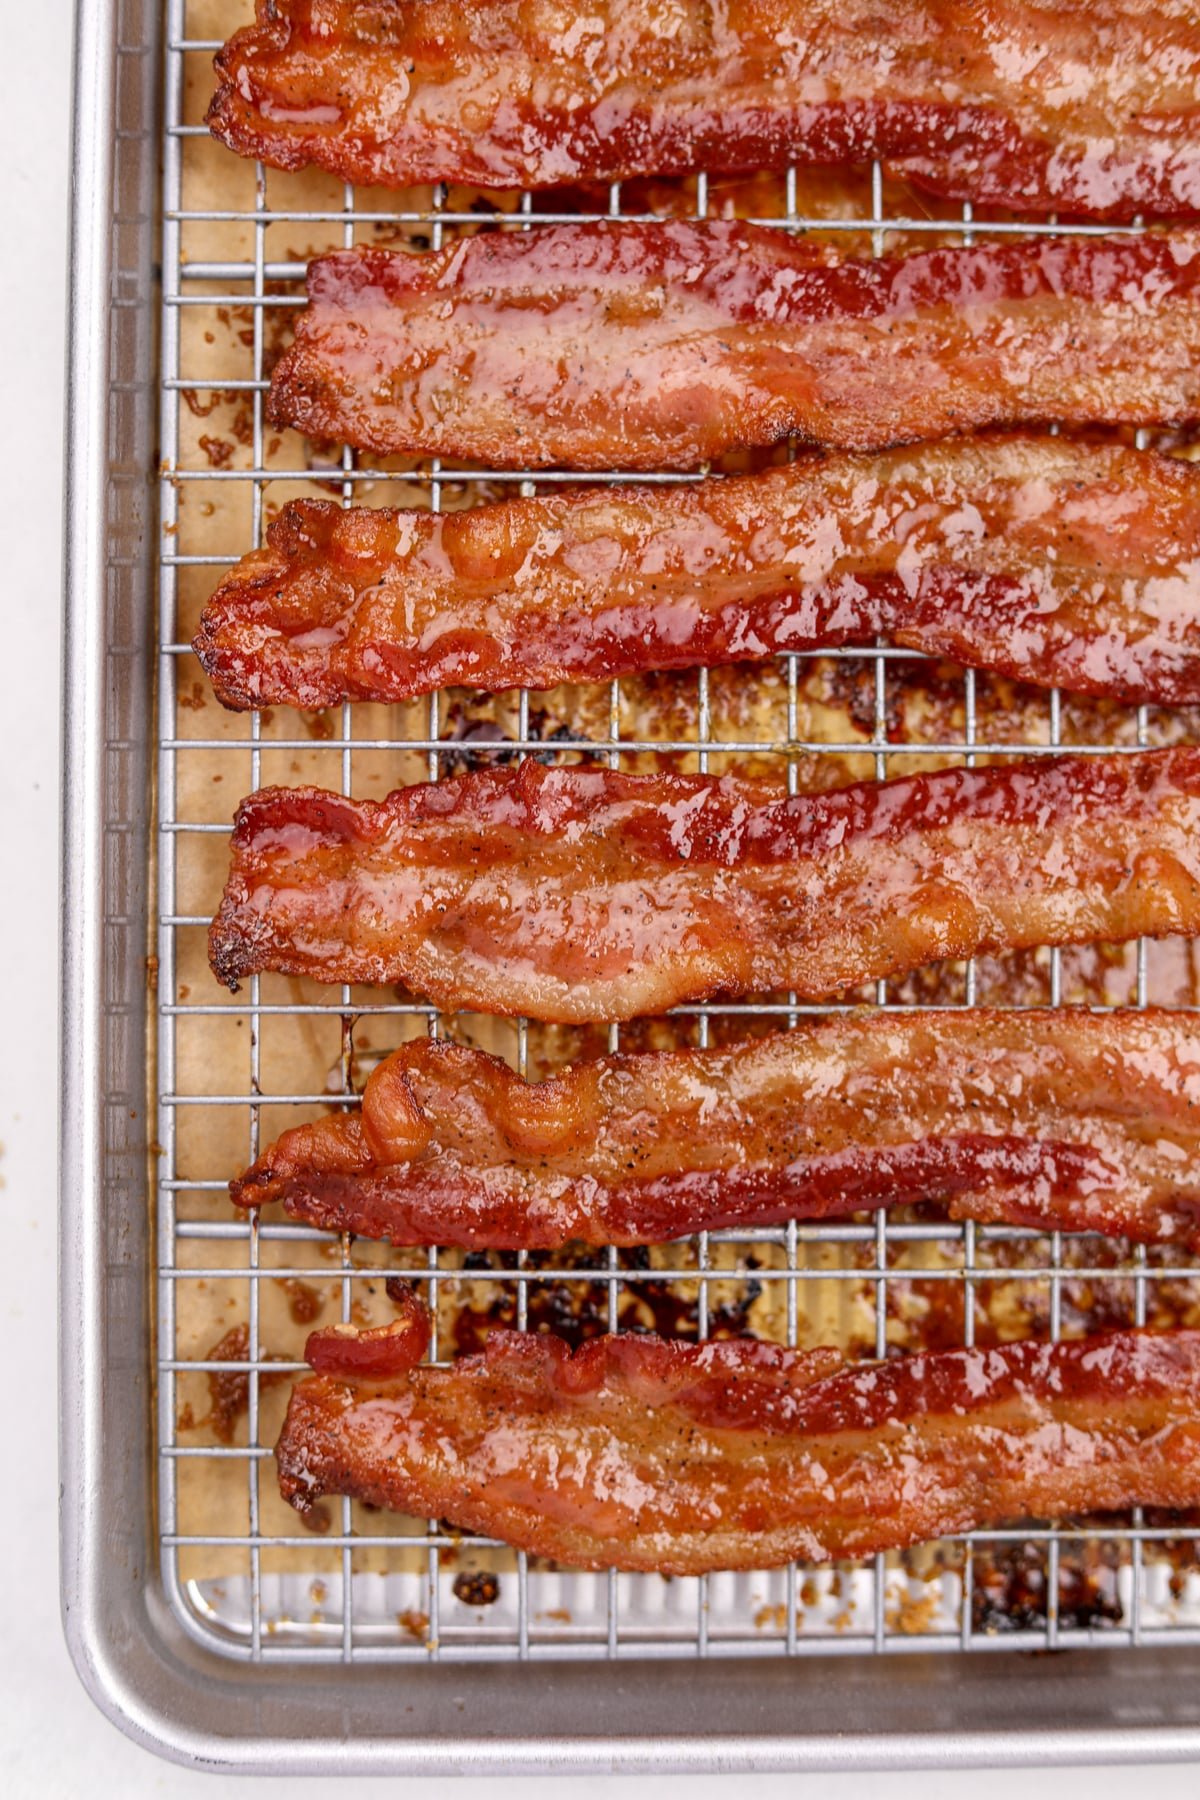 A wire baking rack filled with glazed bacon slices.